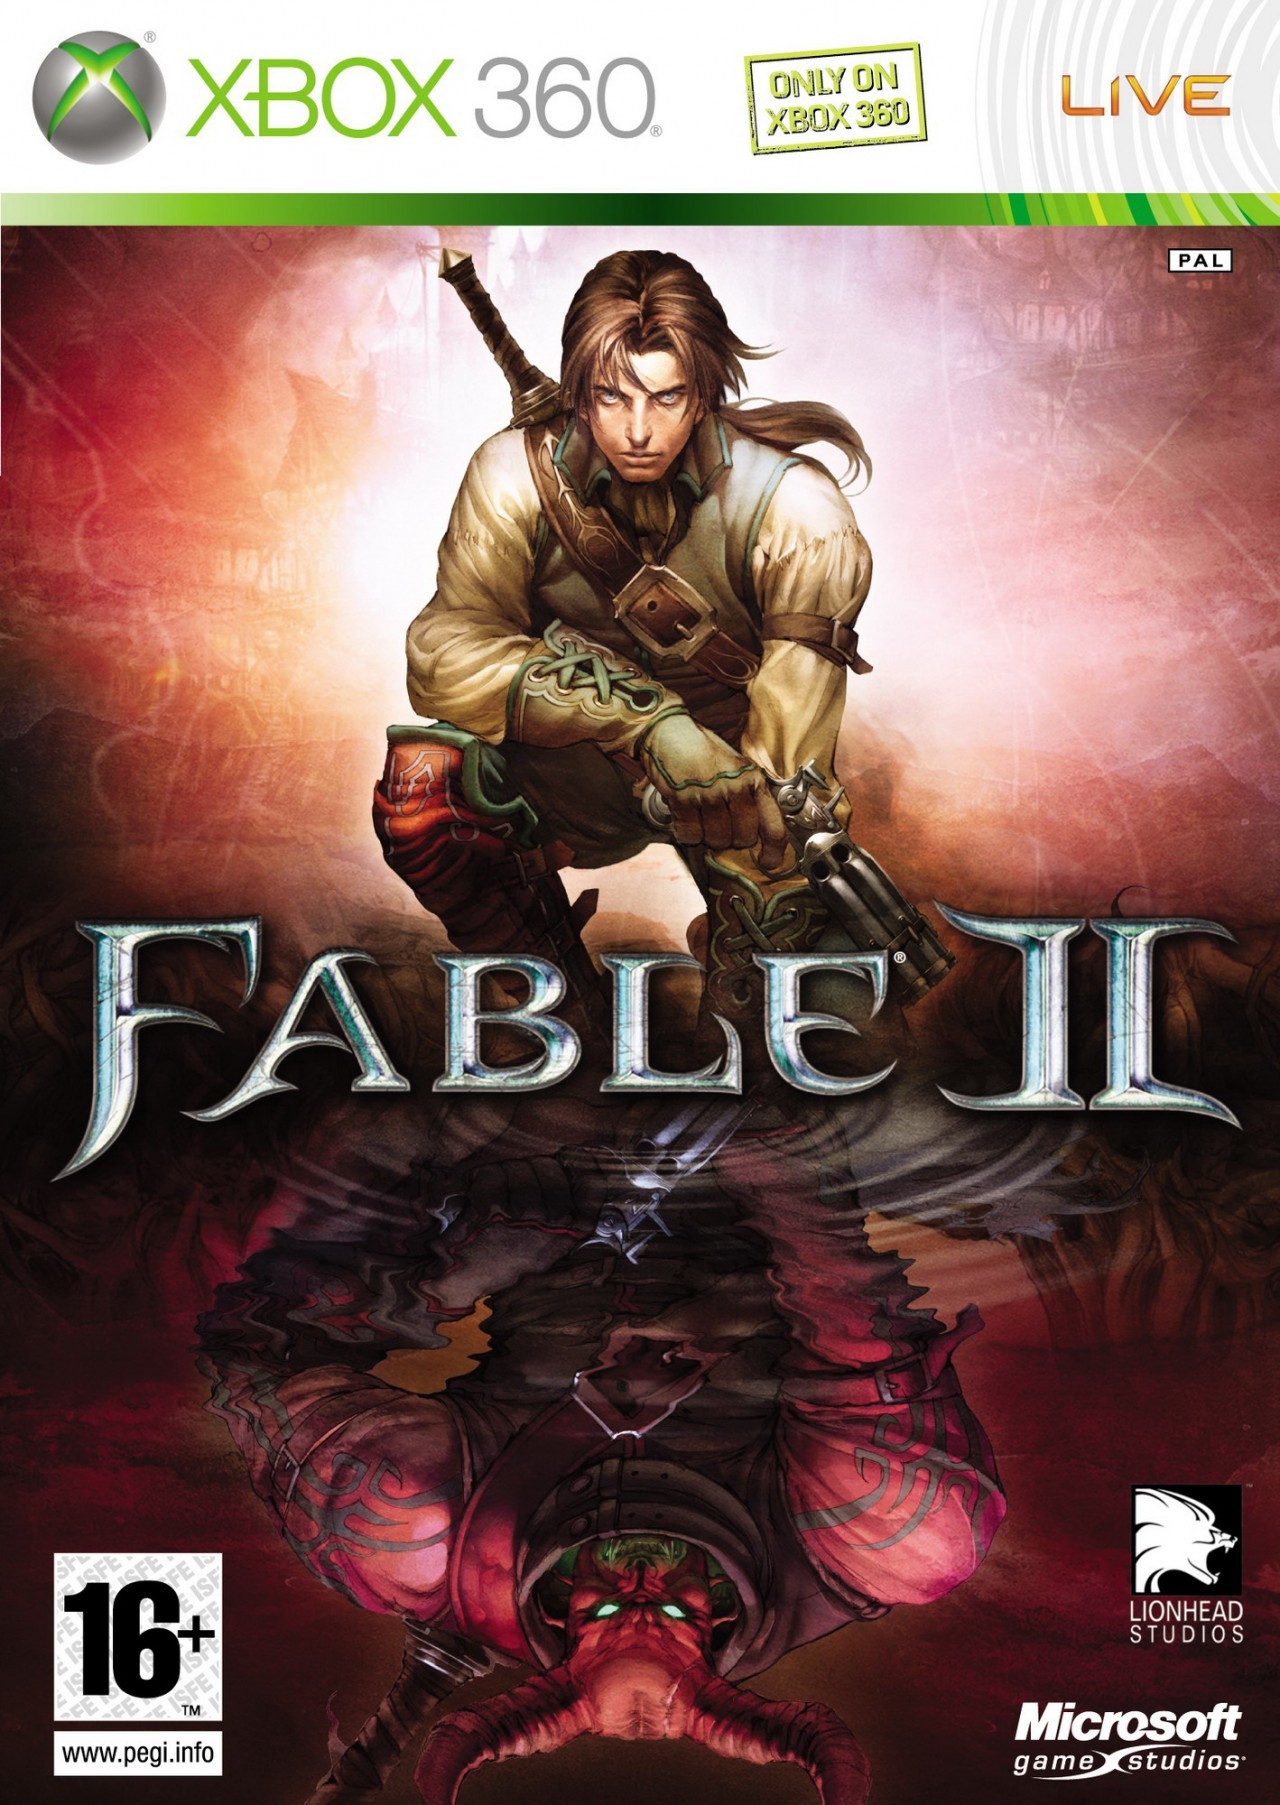 fable-2